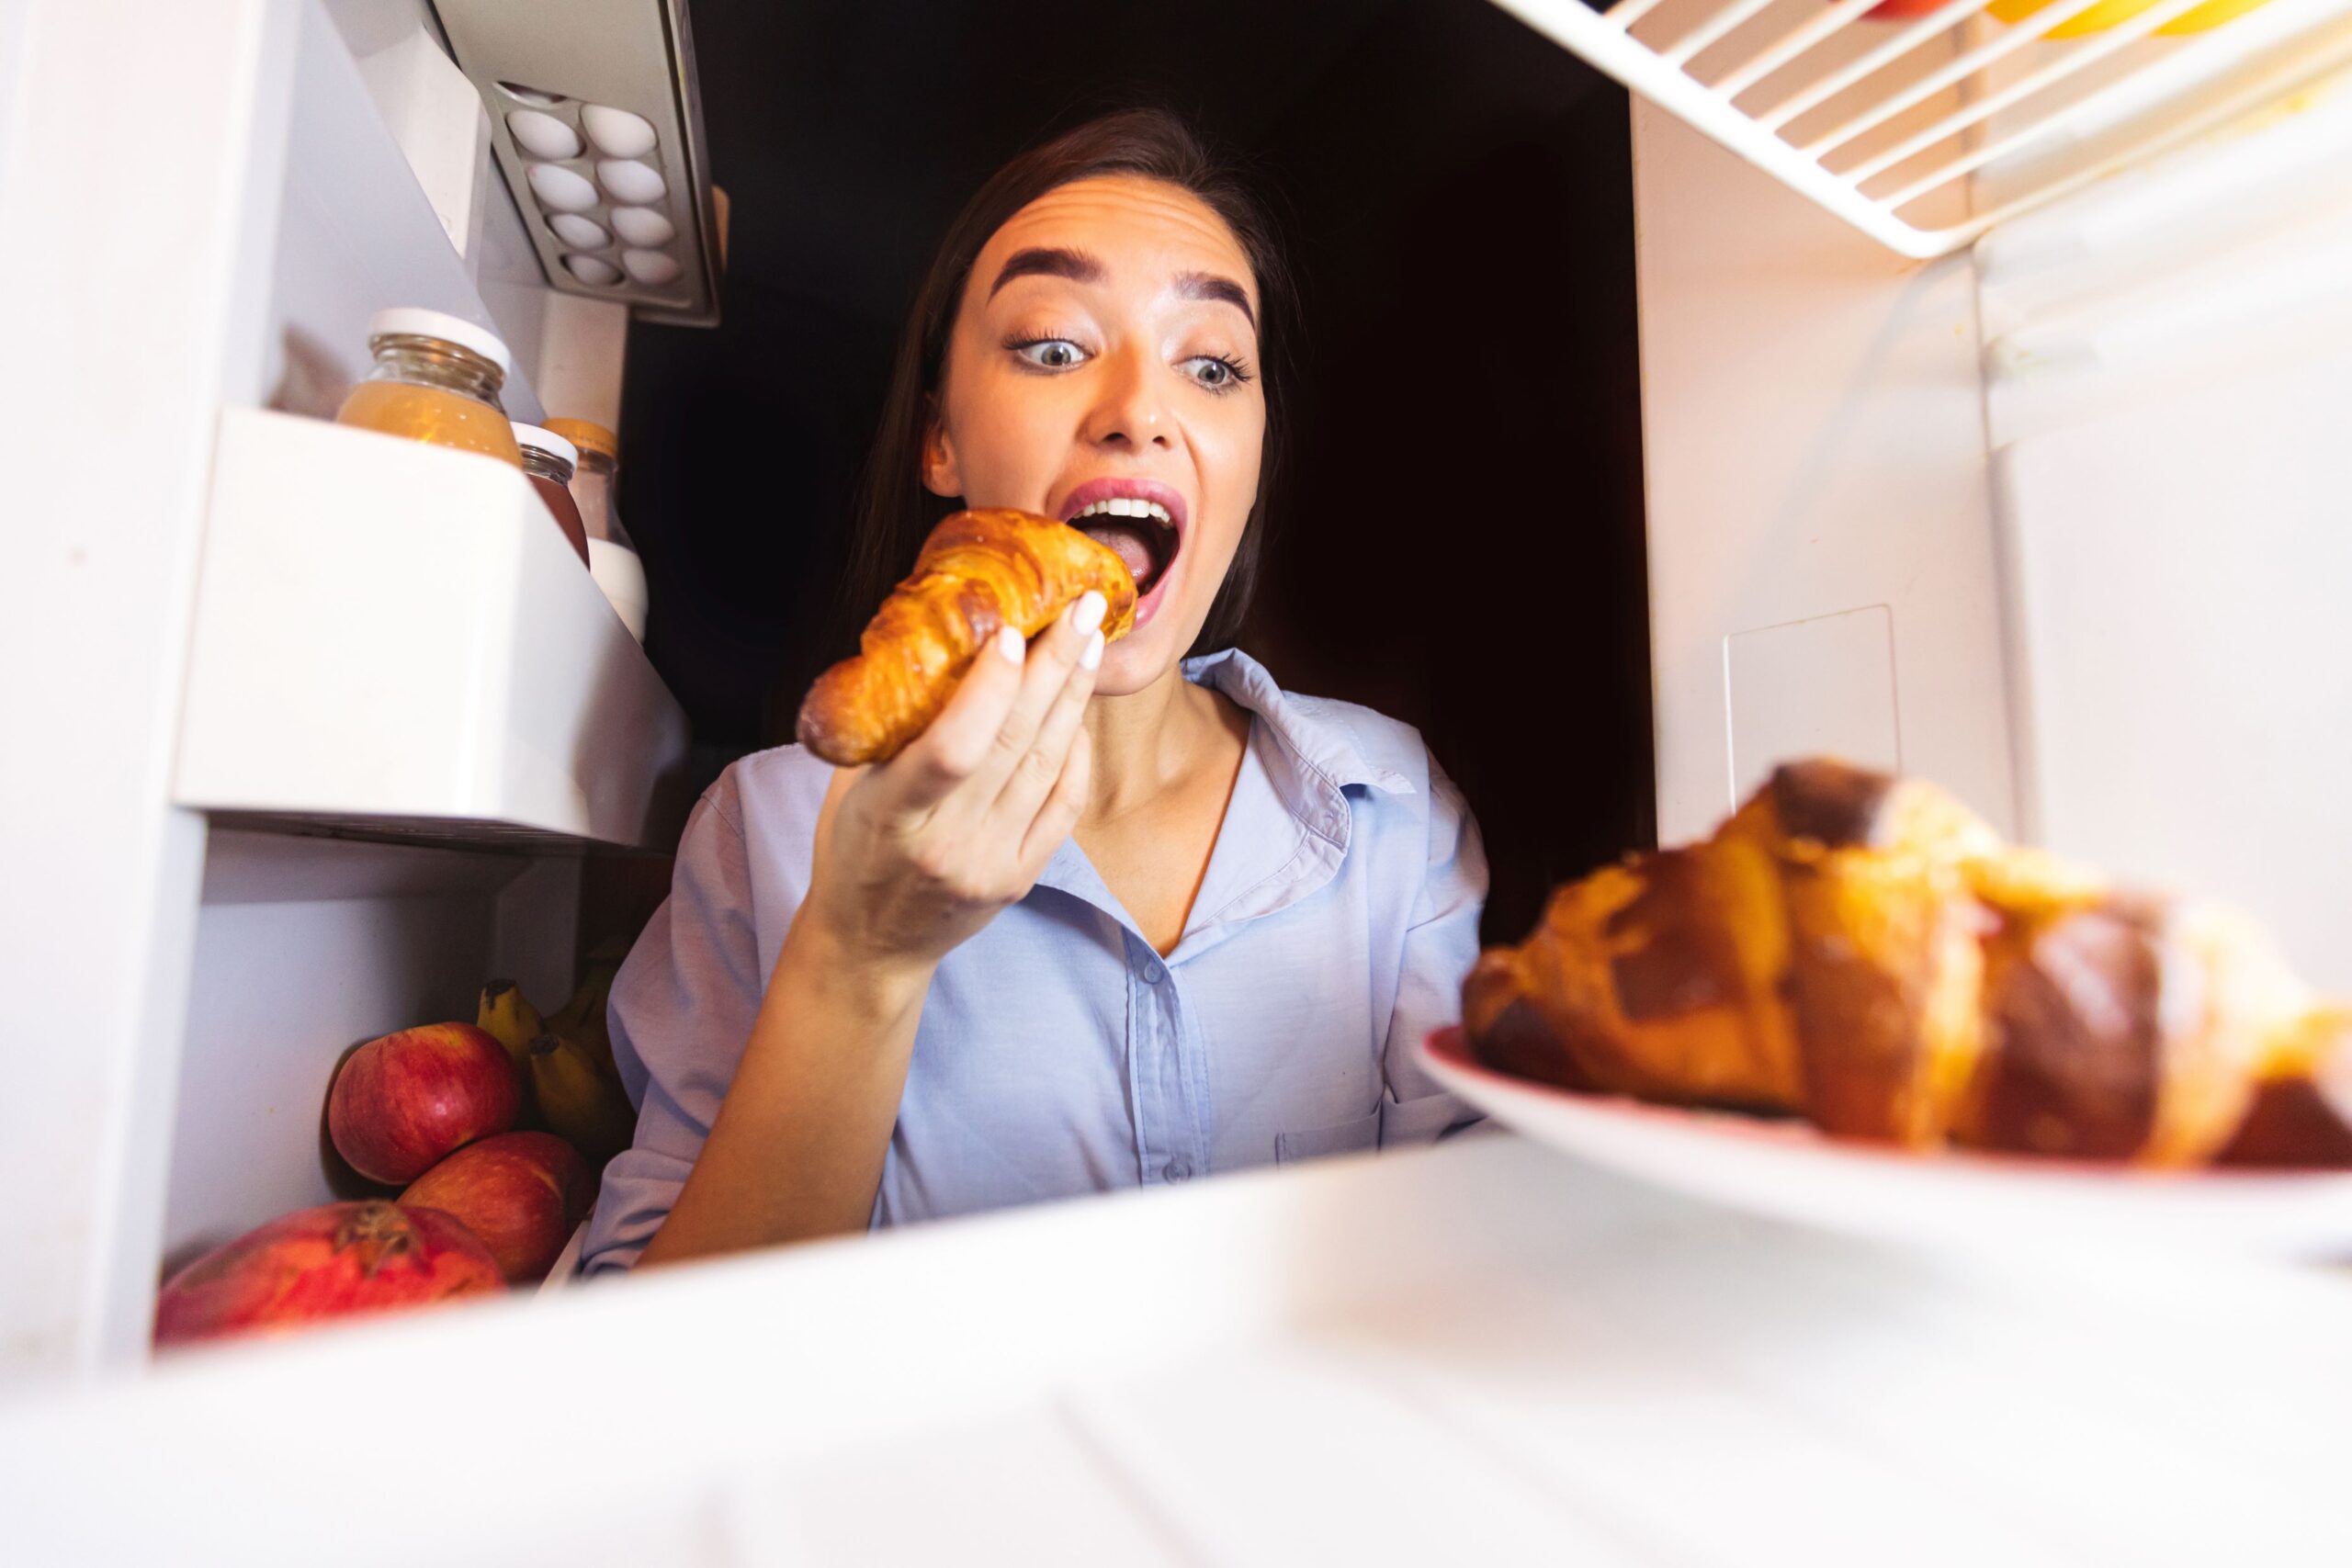 Americans Eat A Meal’s Worth Of Calories While Snacking Every Day